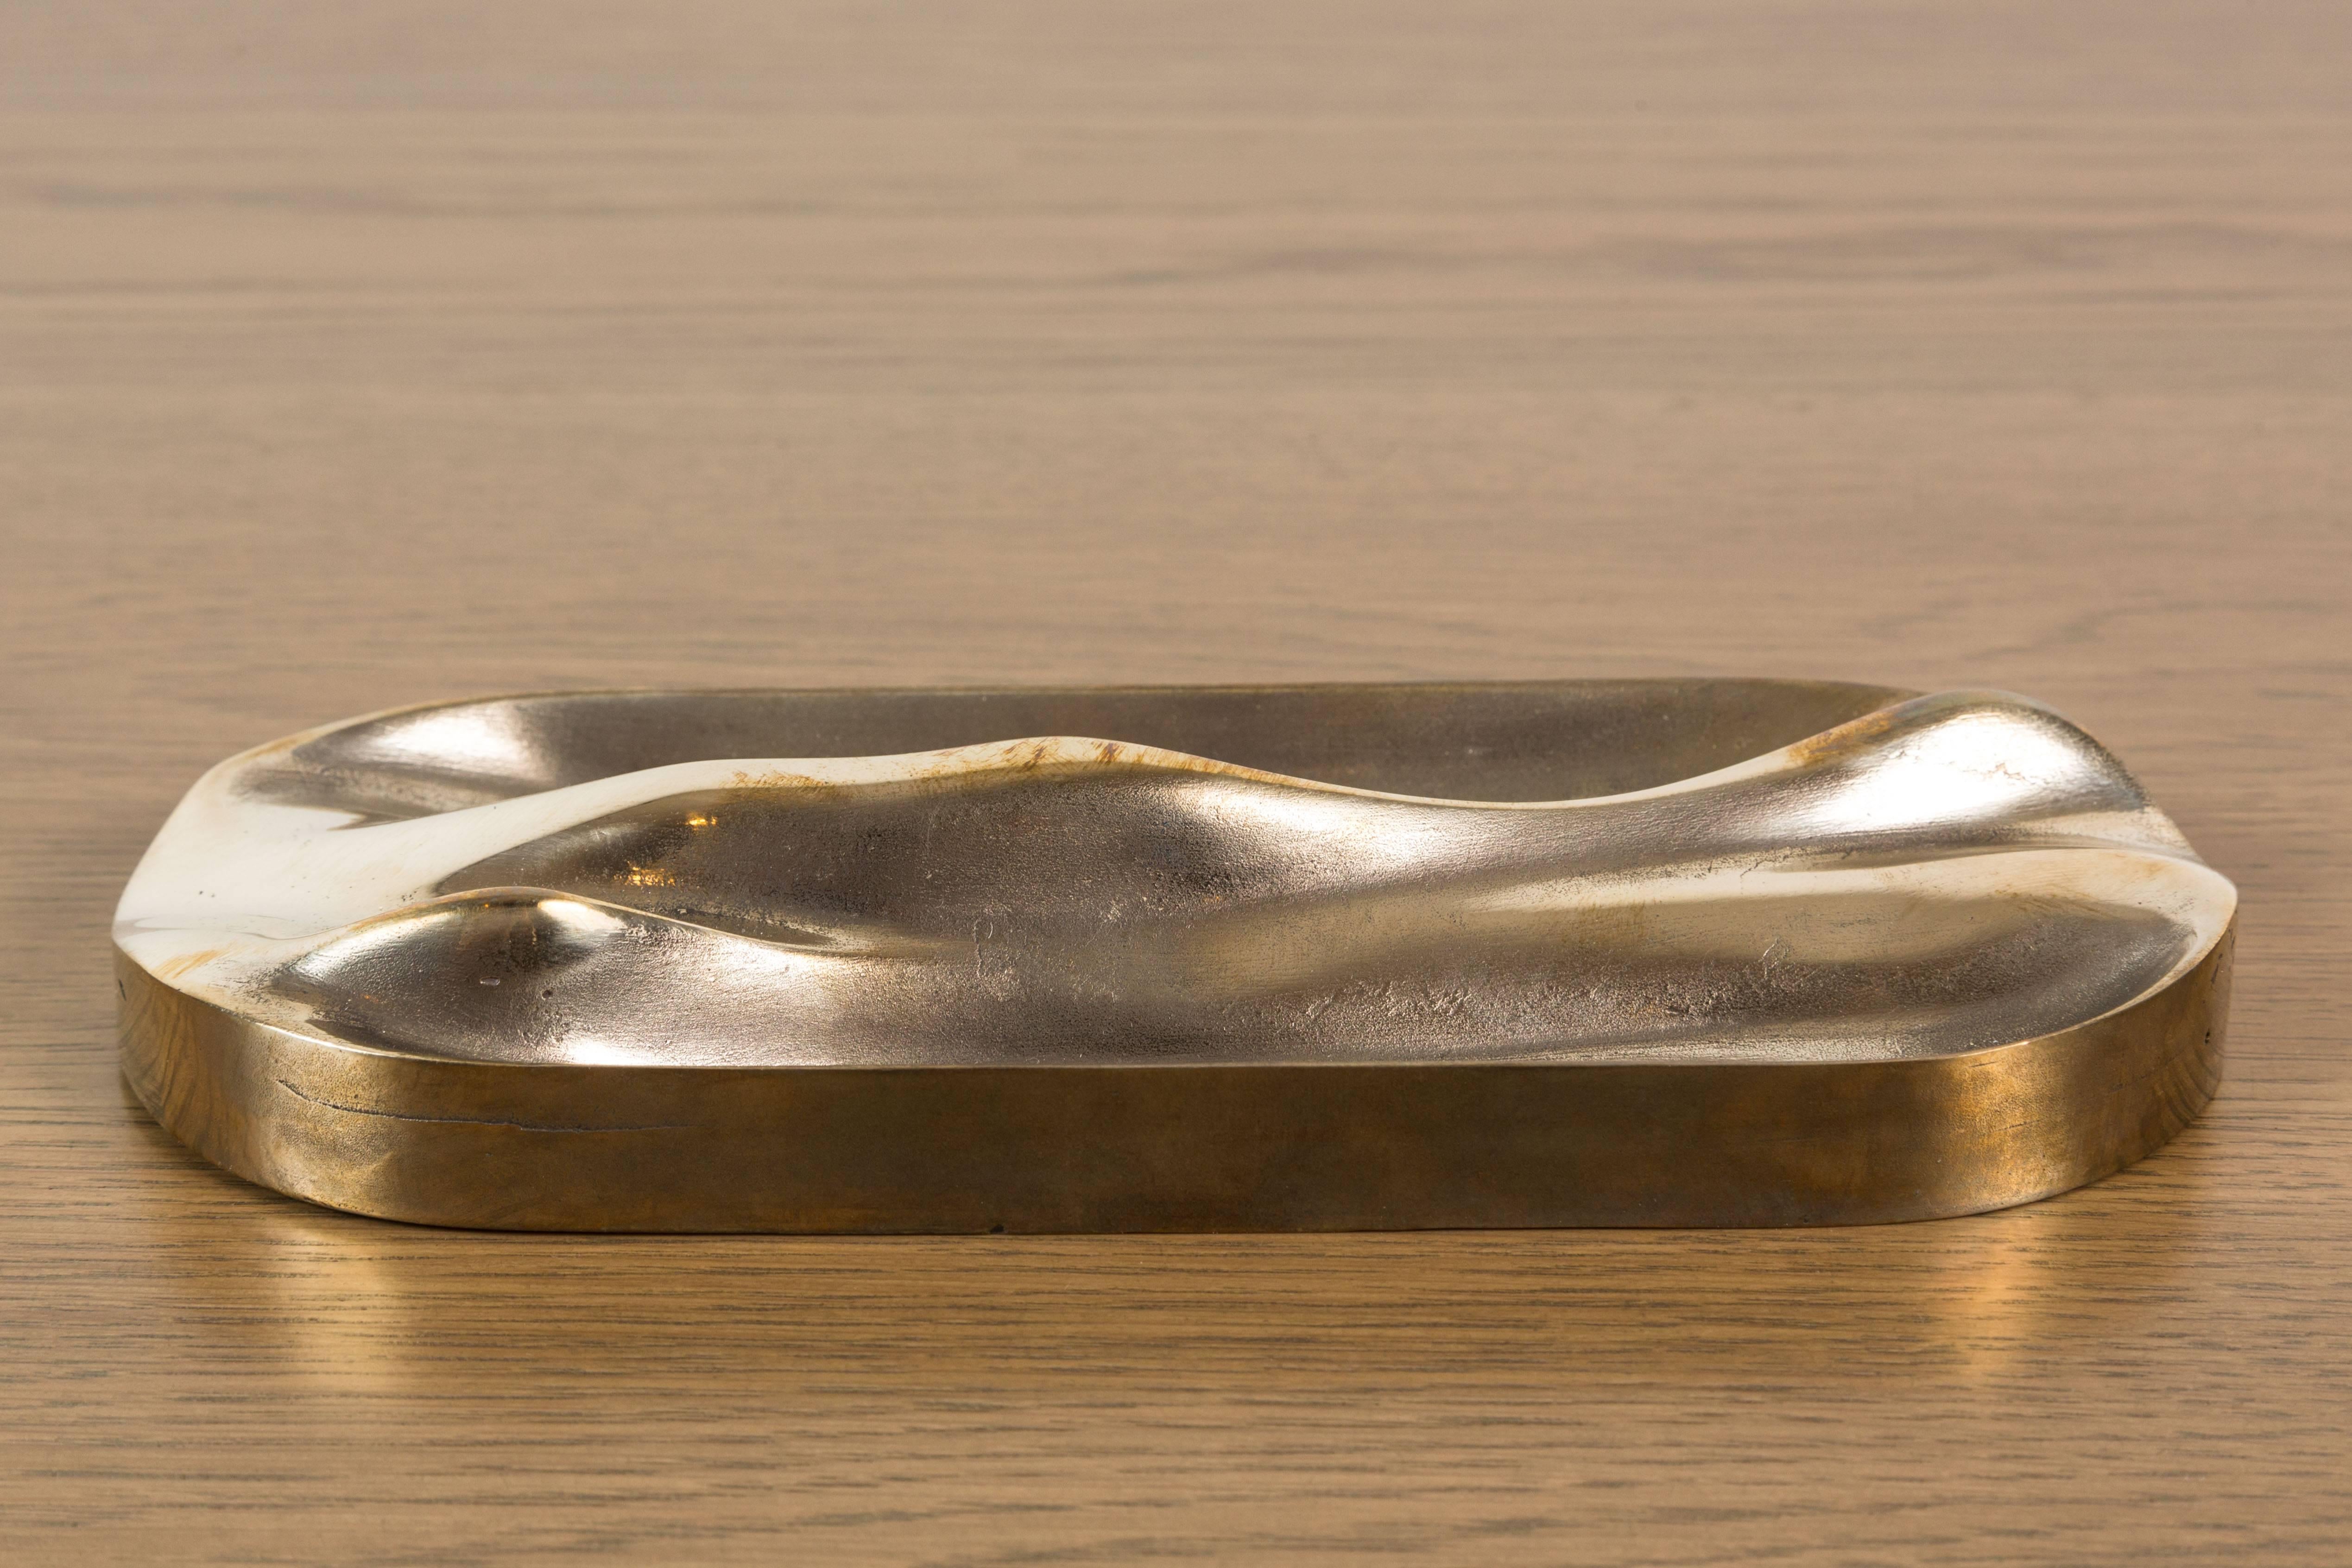 Cast Small Bronze Tray by Artist Vincent Pocsik for Lawson-Fenning